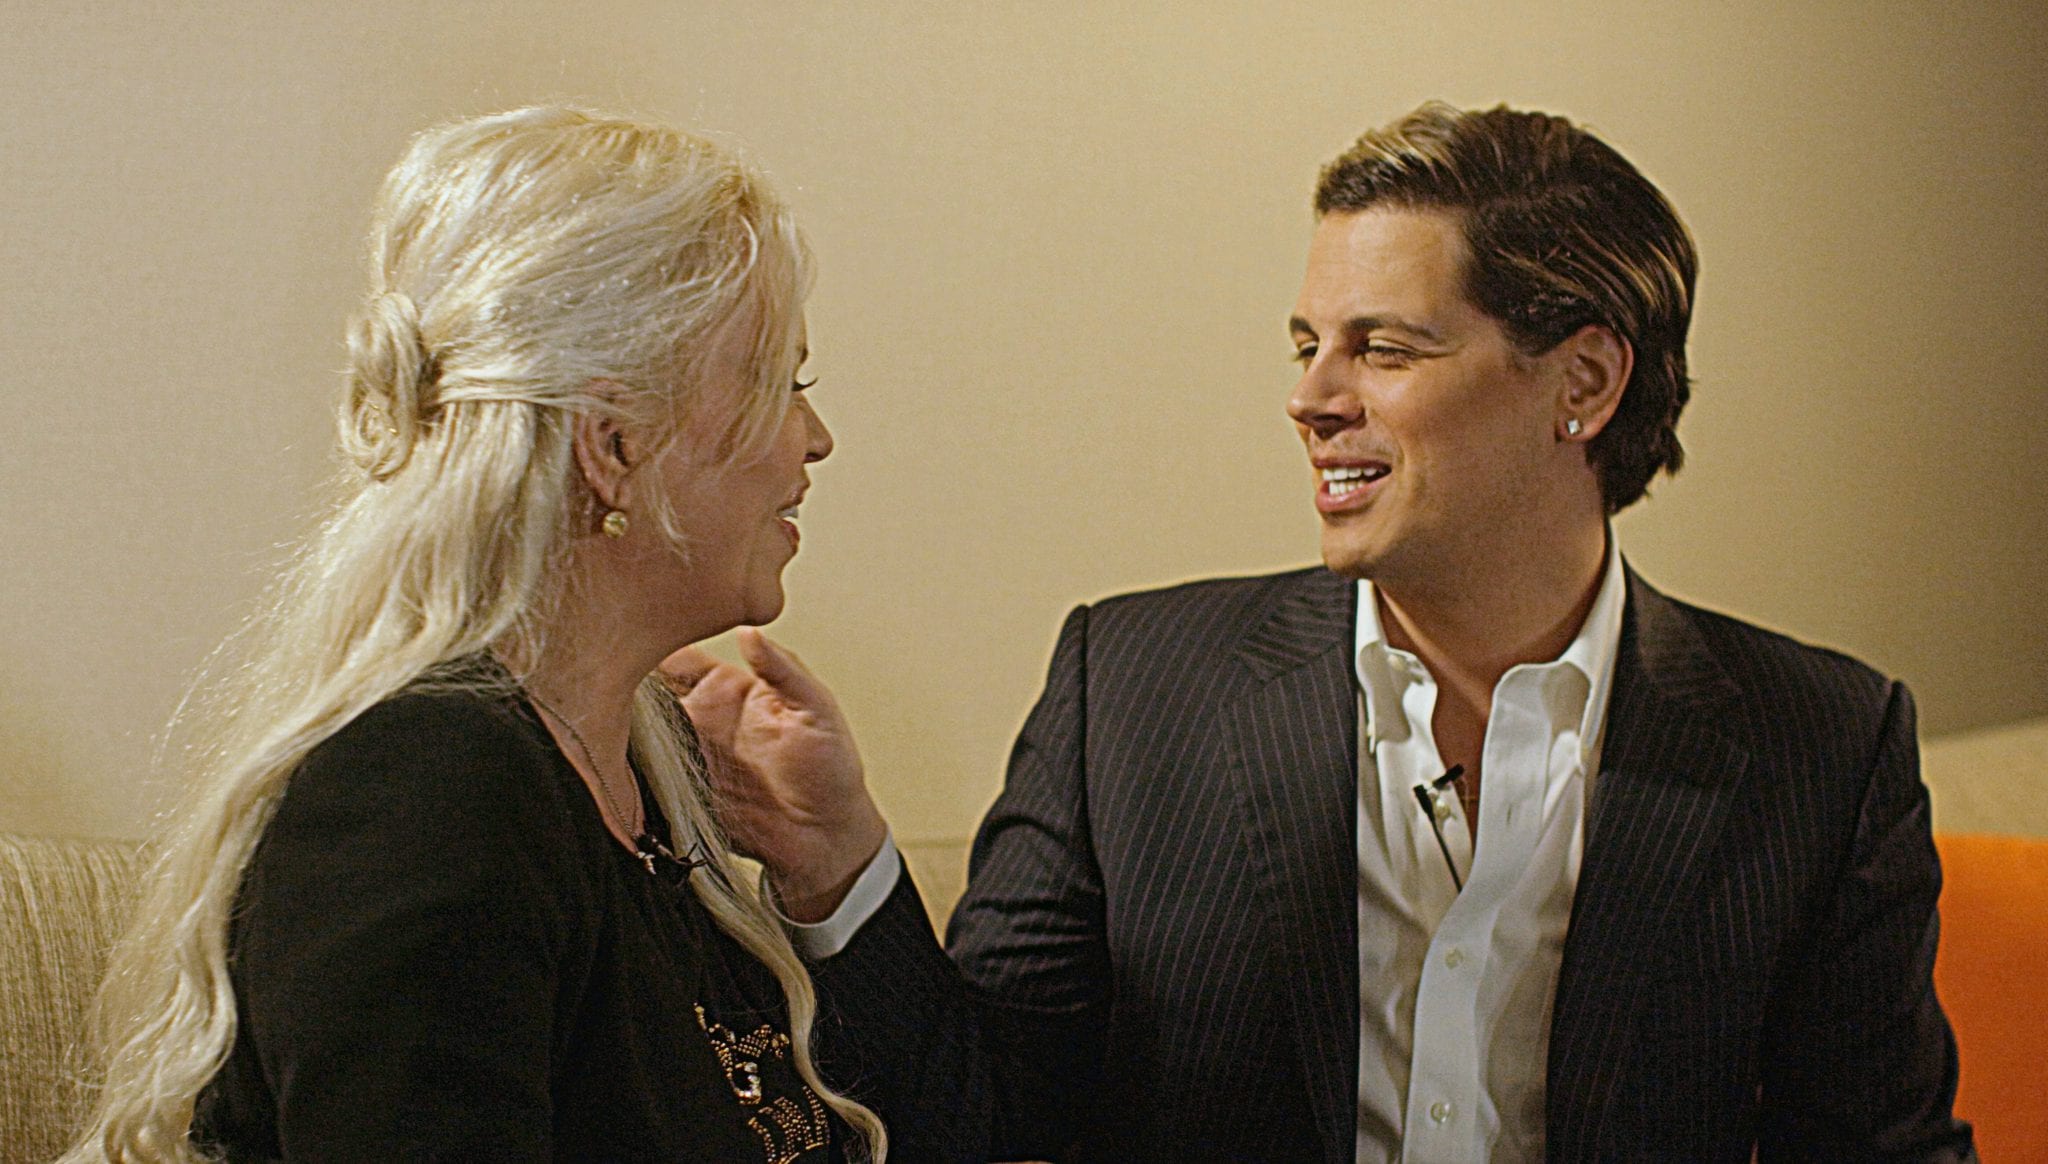 Milo Yiannopoulos to Hanne Nabintu Herland: New Left advocates for Tyranny.